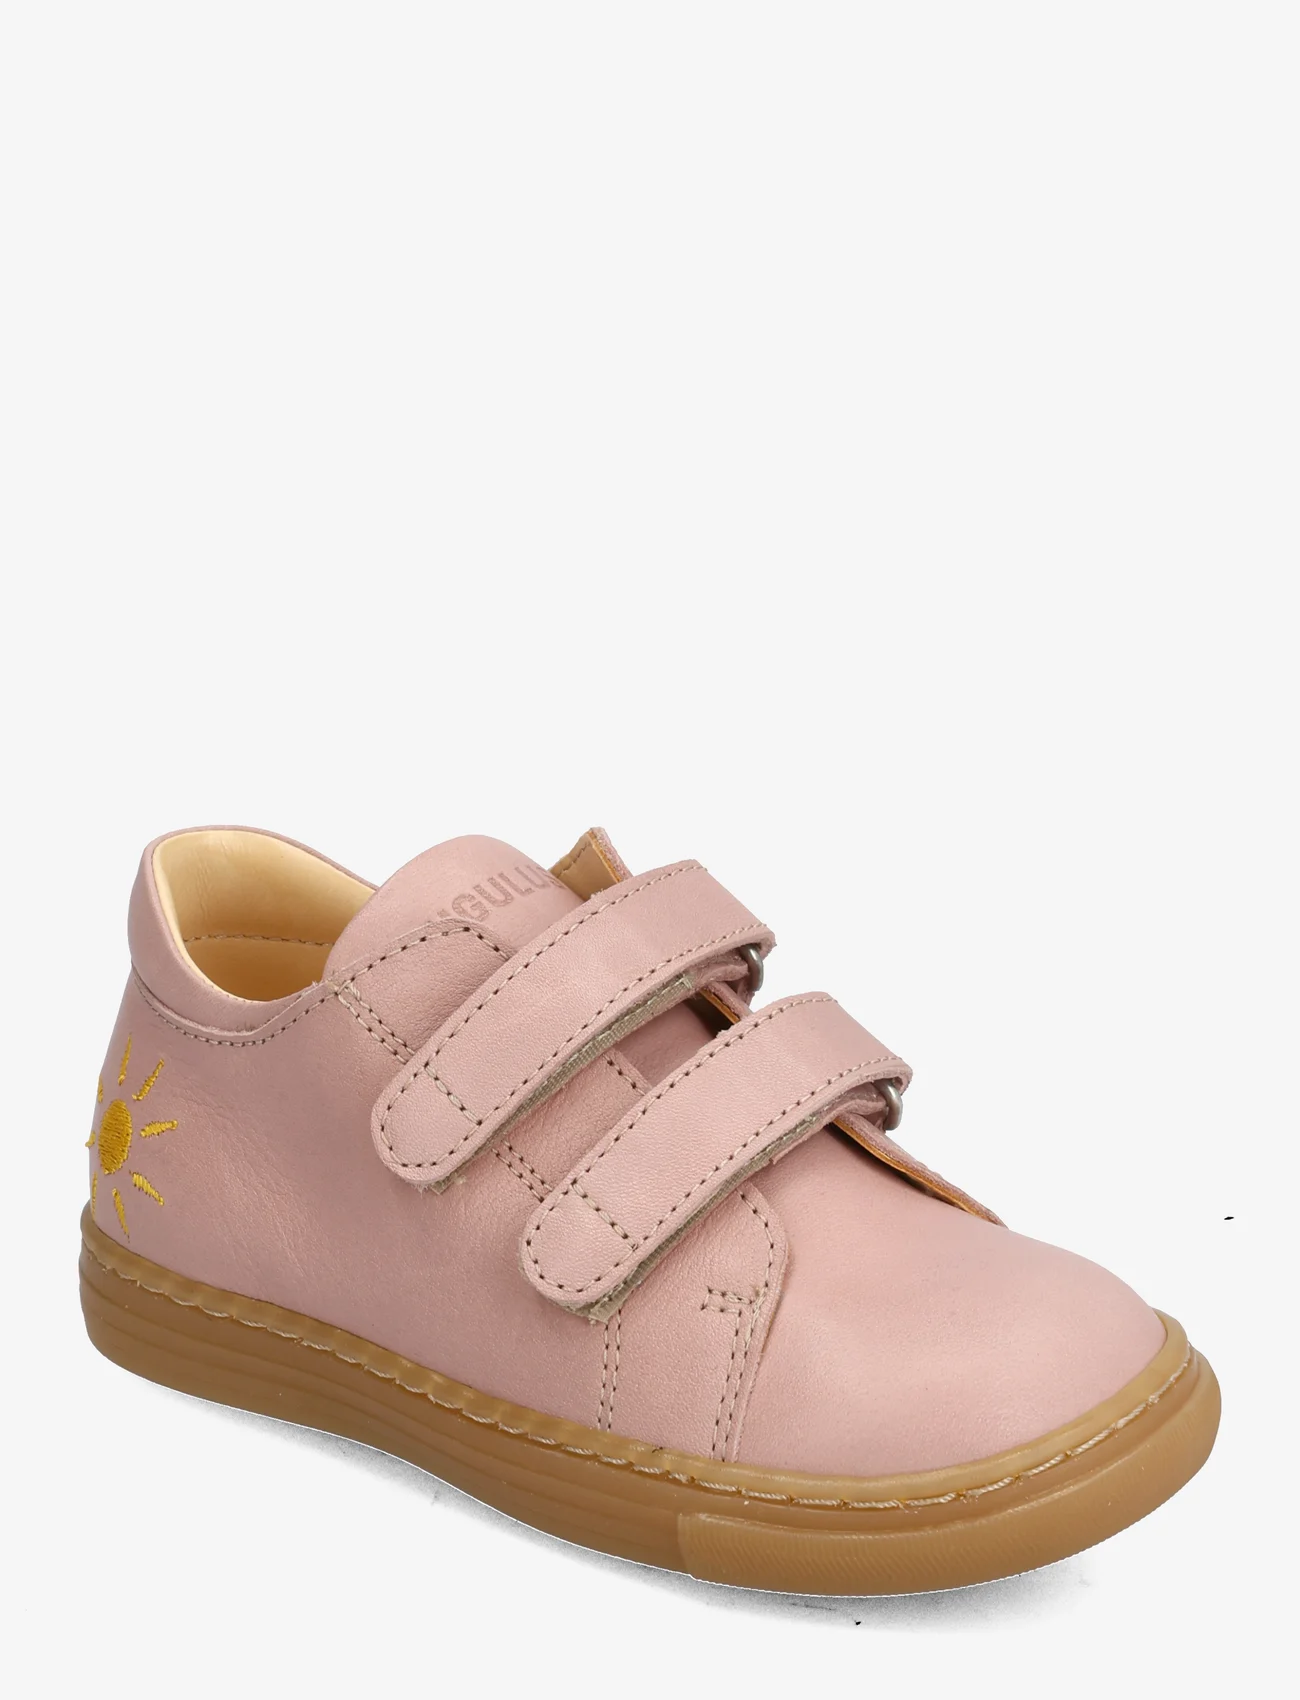 ANGULUS - Shoes - flat - with velcro - sommarfynd - 1730 rose - 0